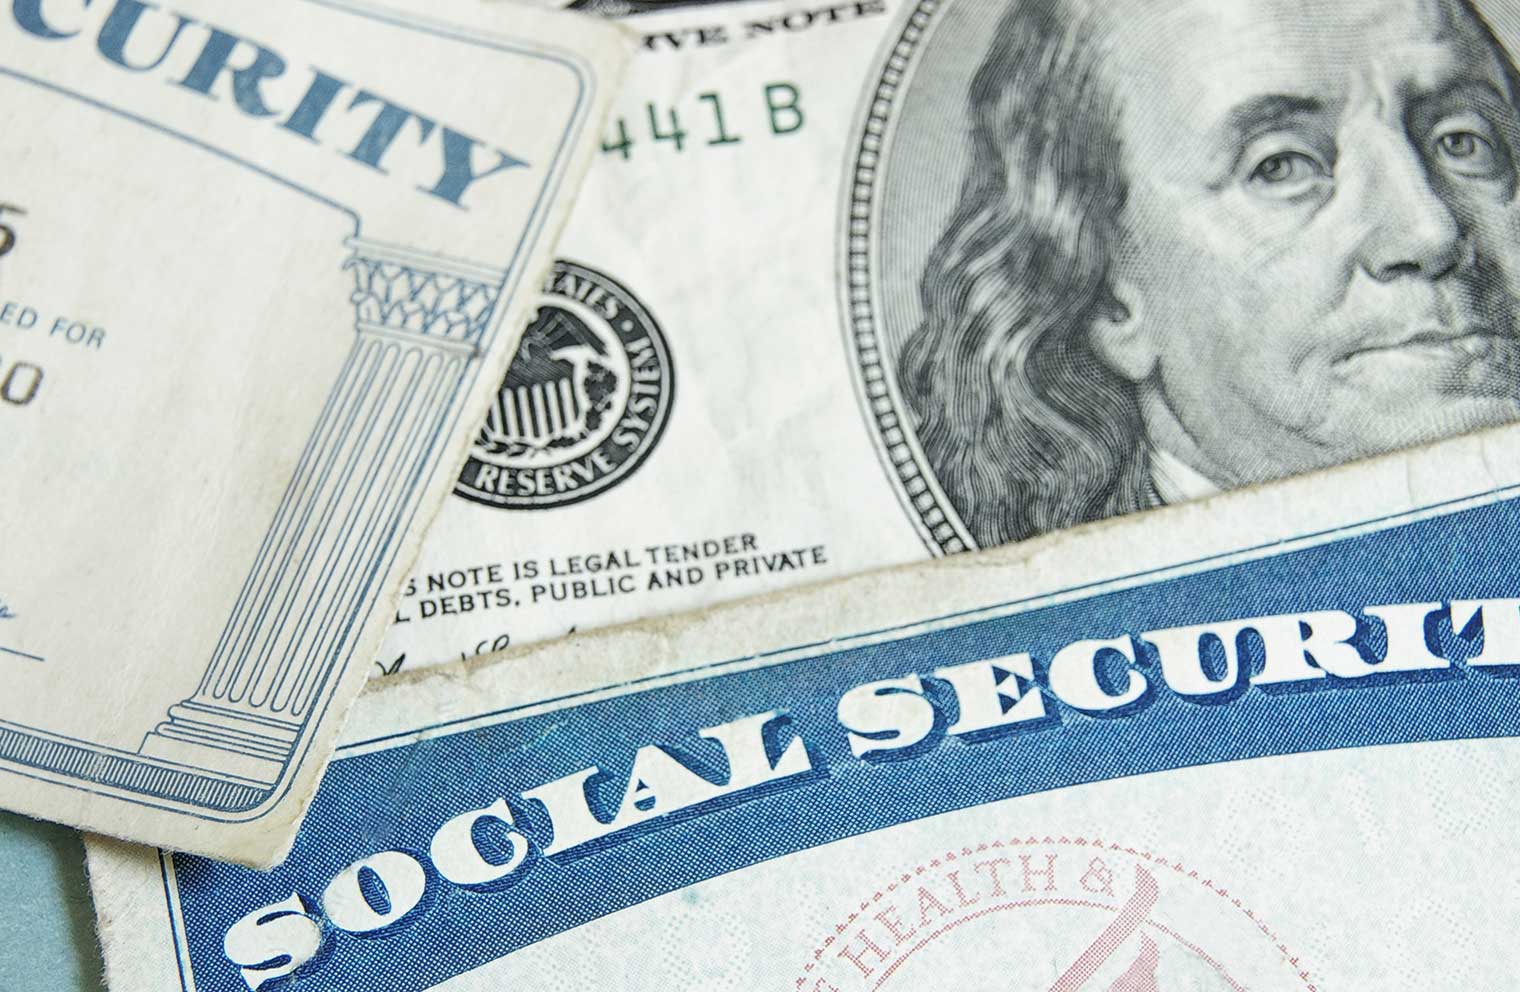 Image of a social security card and money.